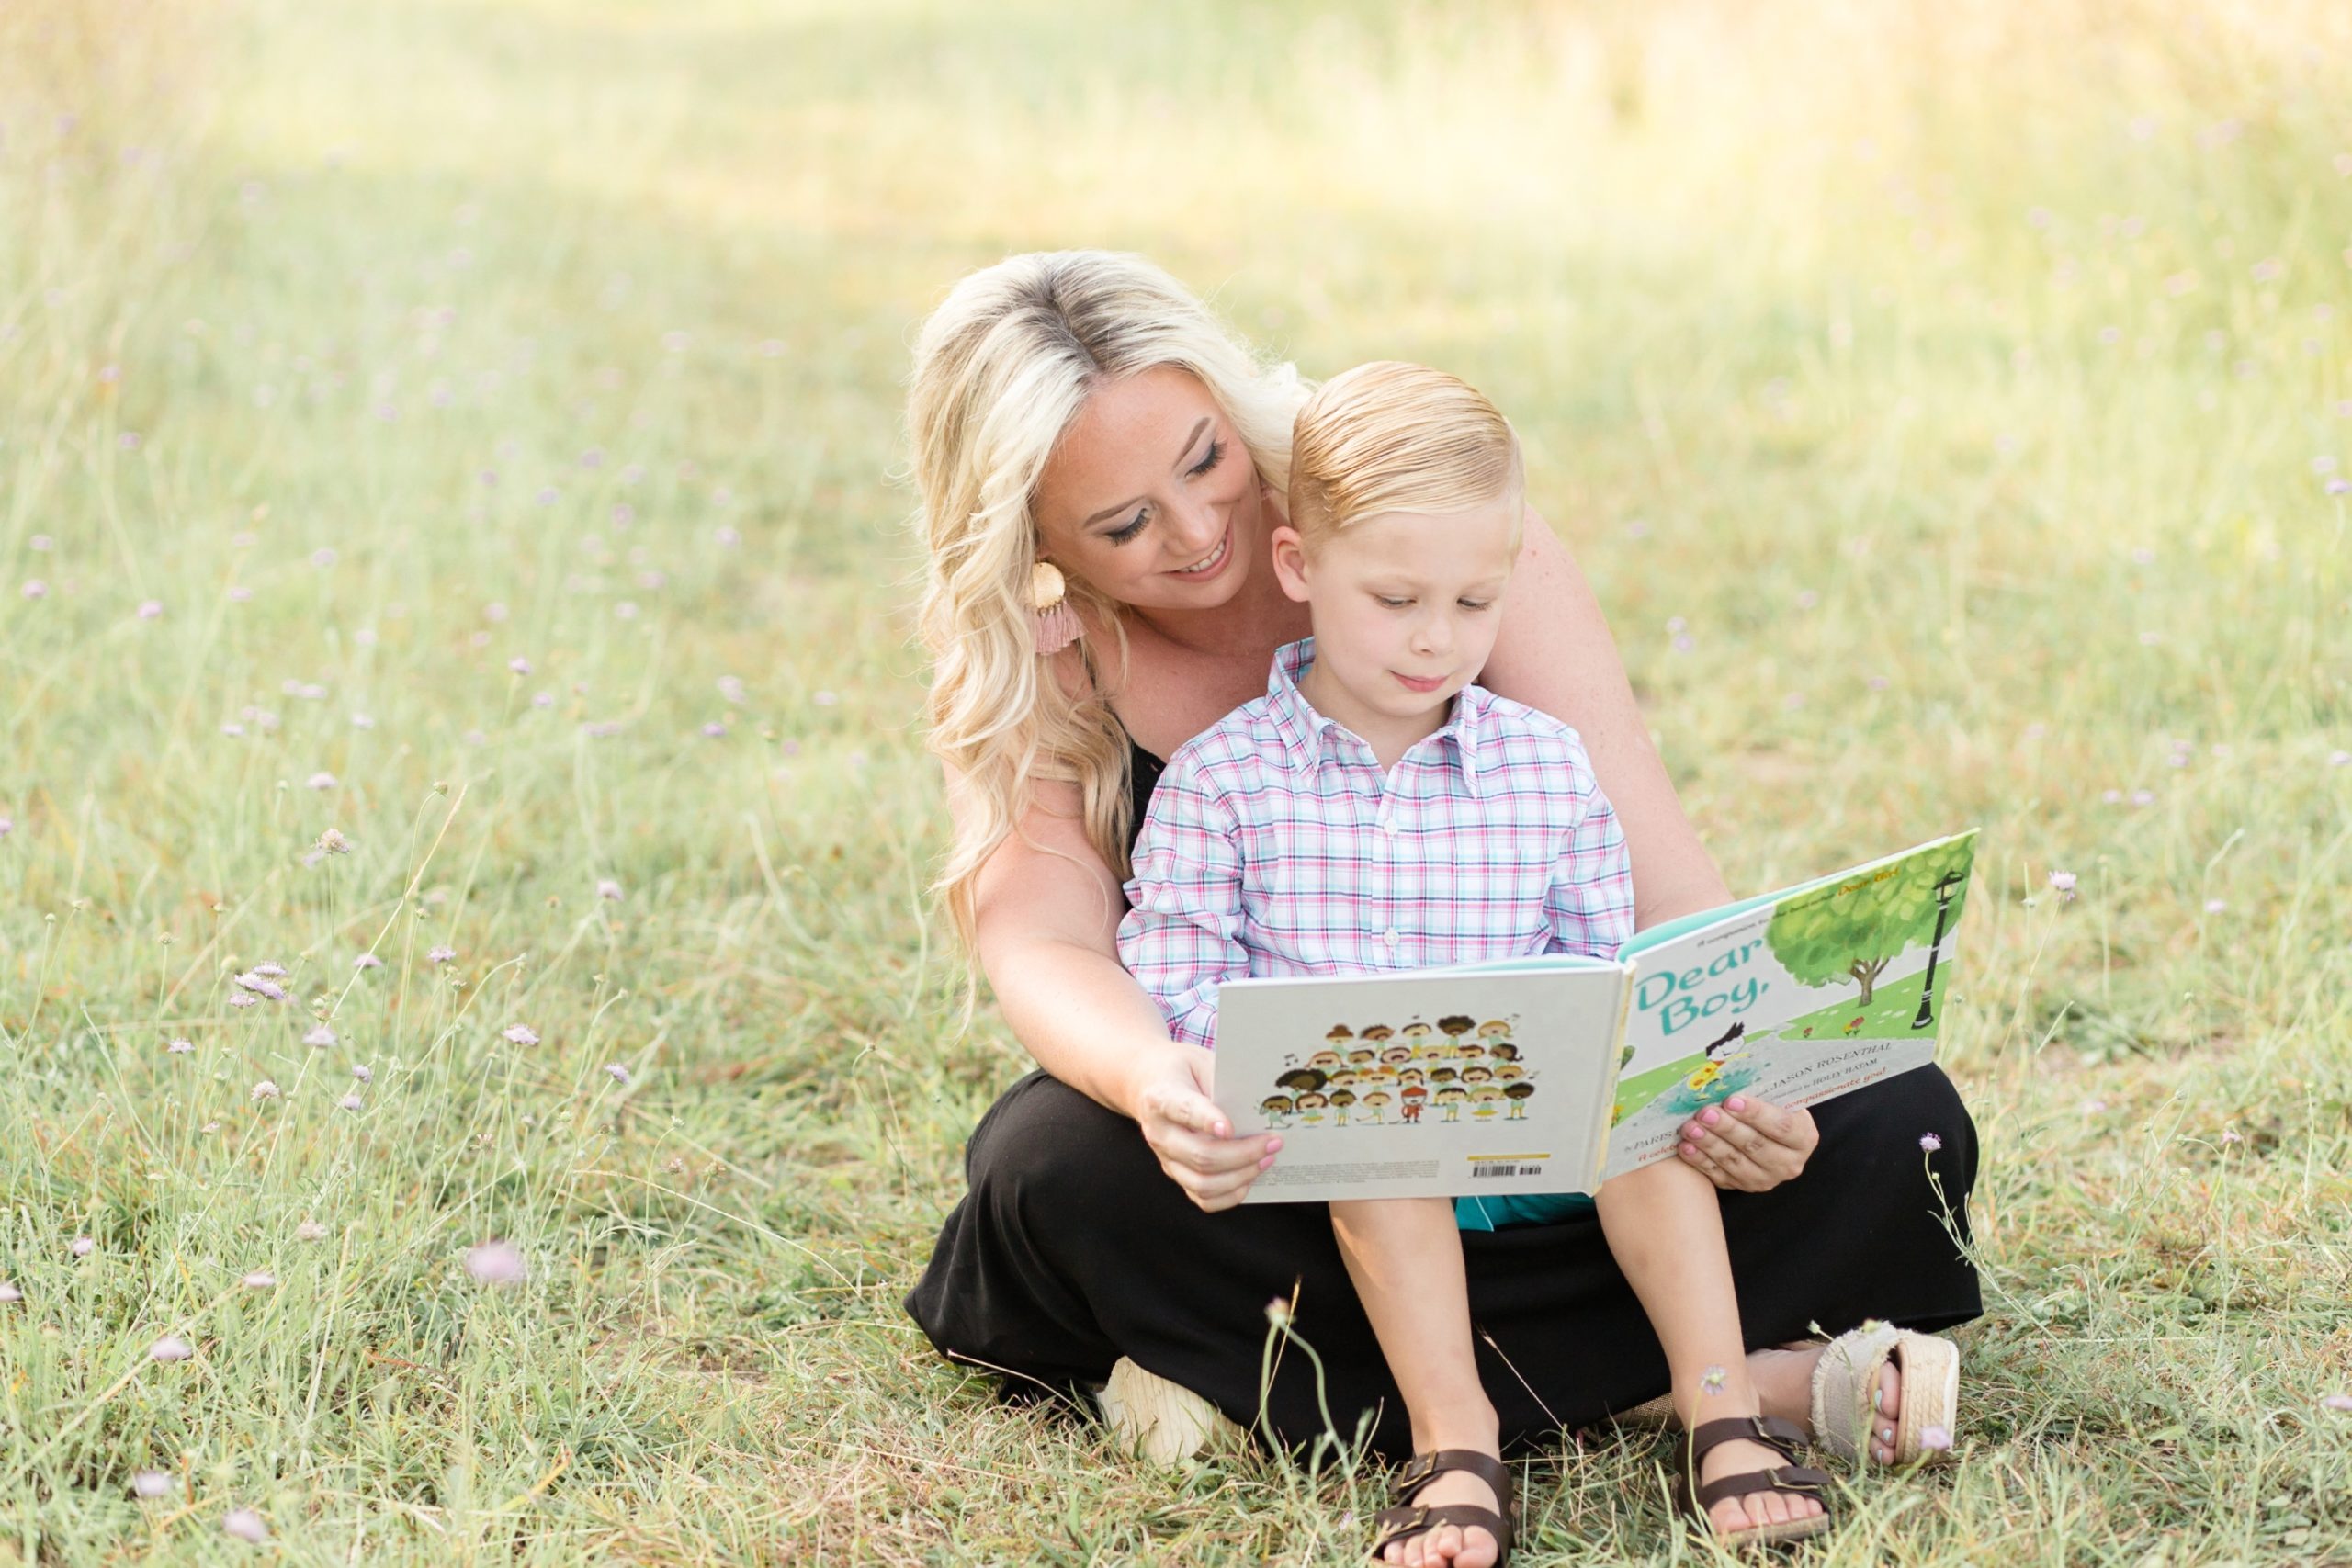 Mommy and me session in the summer at Frisco Commons Park in Frisco, TX with family photography team Wisp + Willow Photography Co. Click to see more from this sweet session live on the blog now!